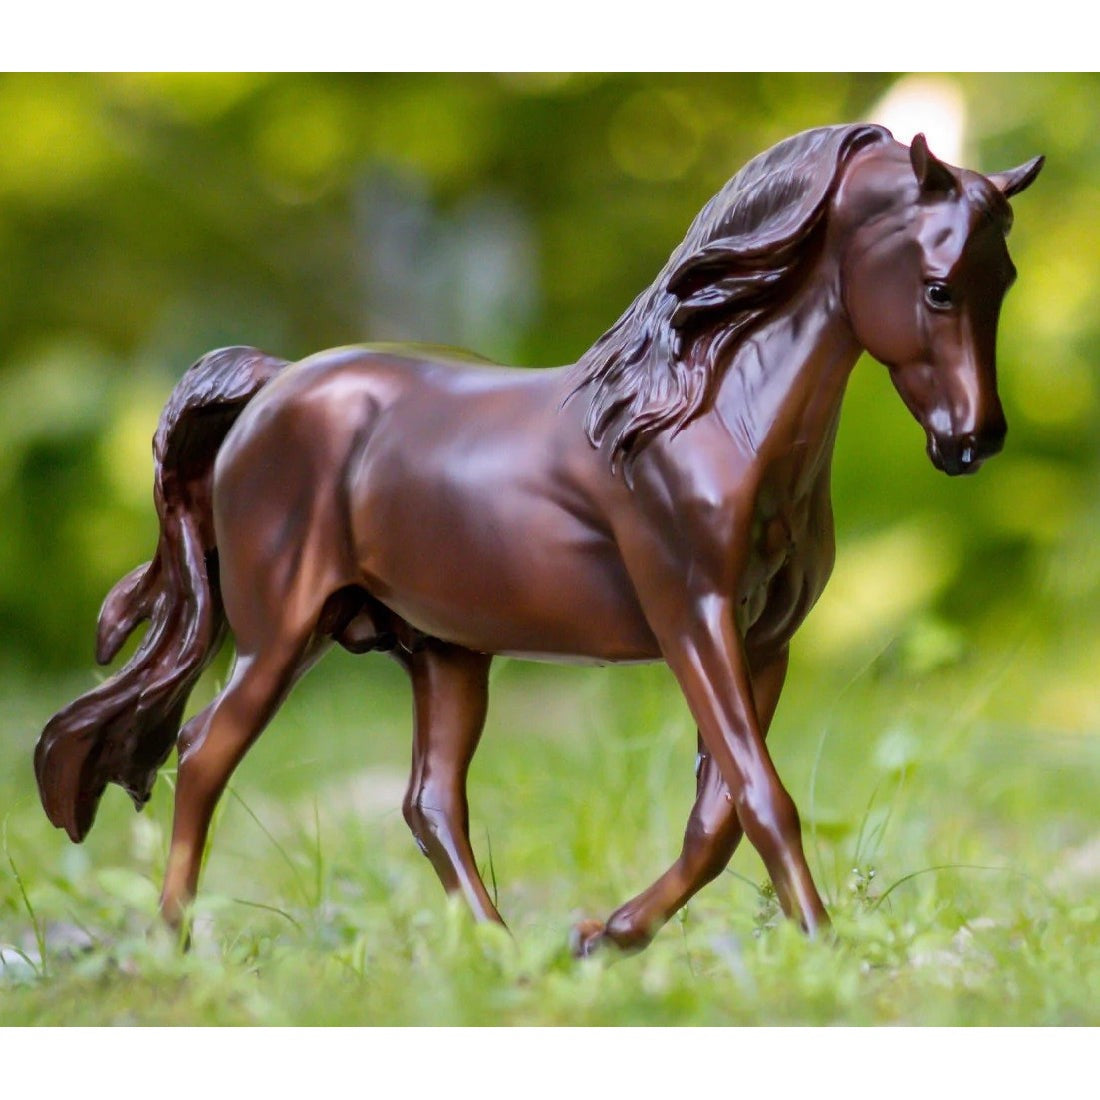 Breyer Horse Toys model of a brown horse on green grass.